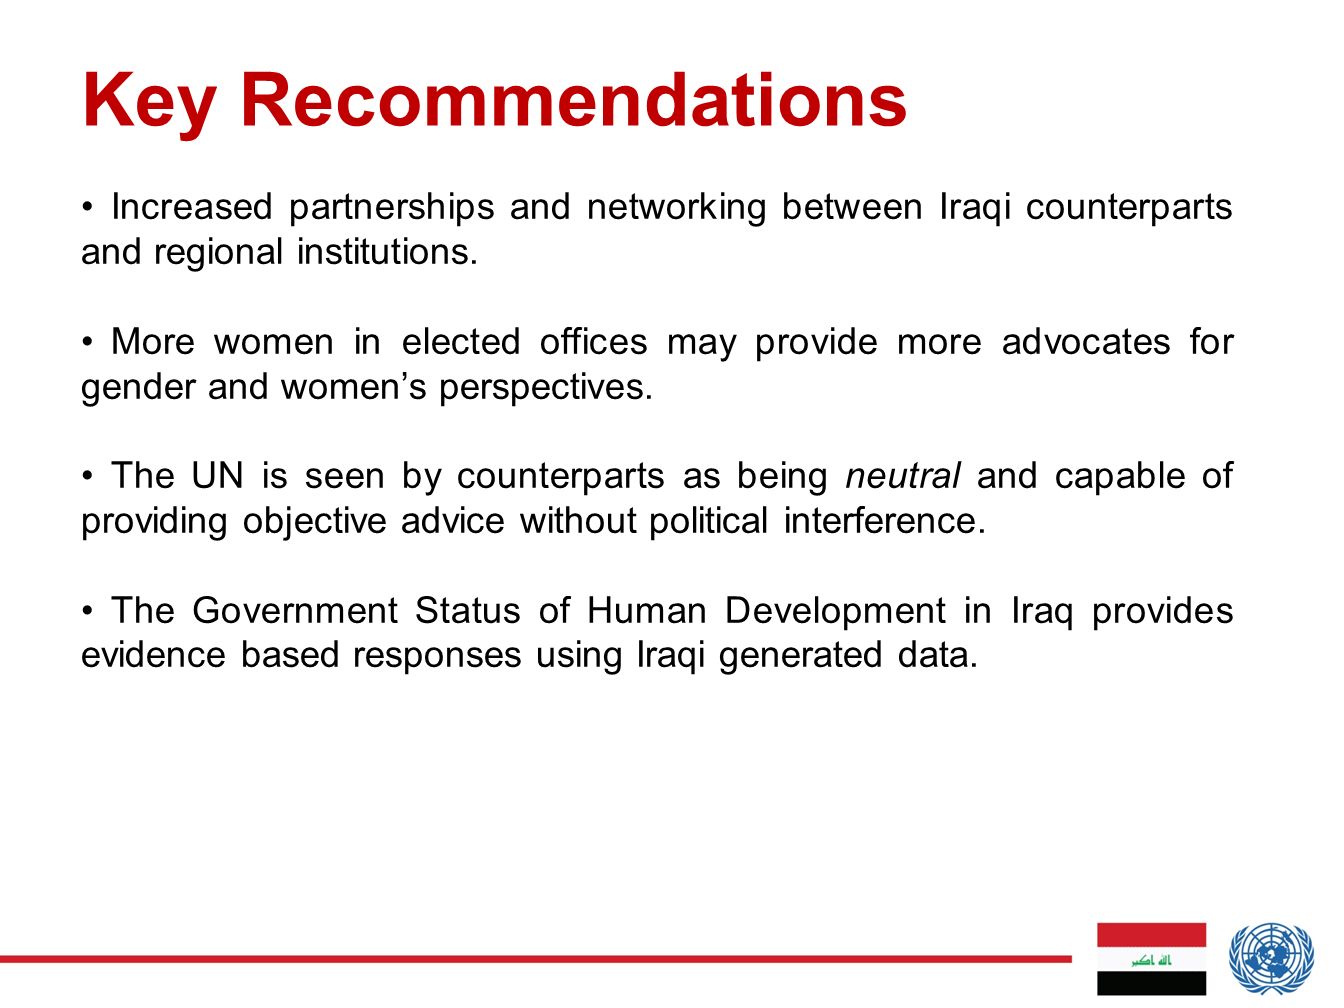 Increased partnerships and networking between Iraqi counterparts and regional institutions.